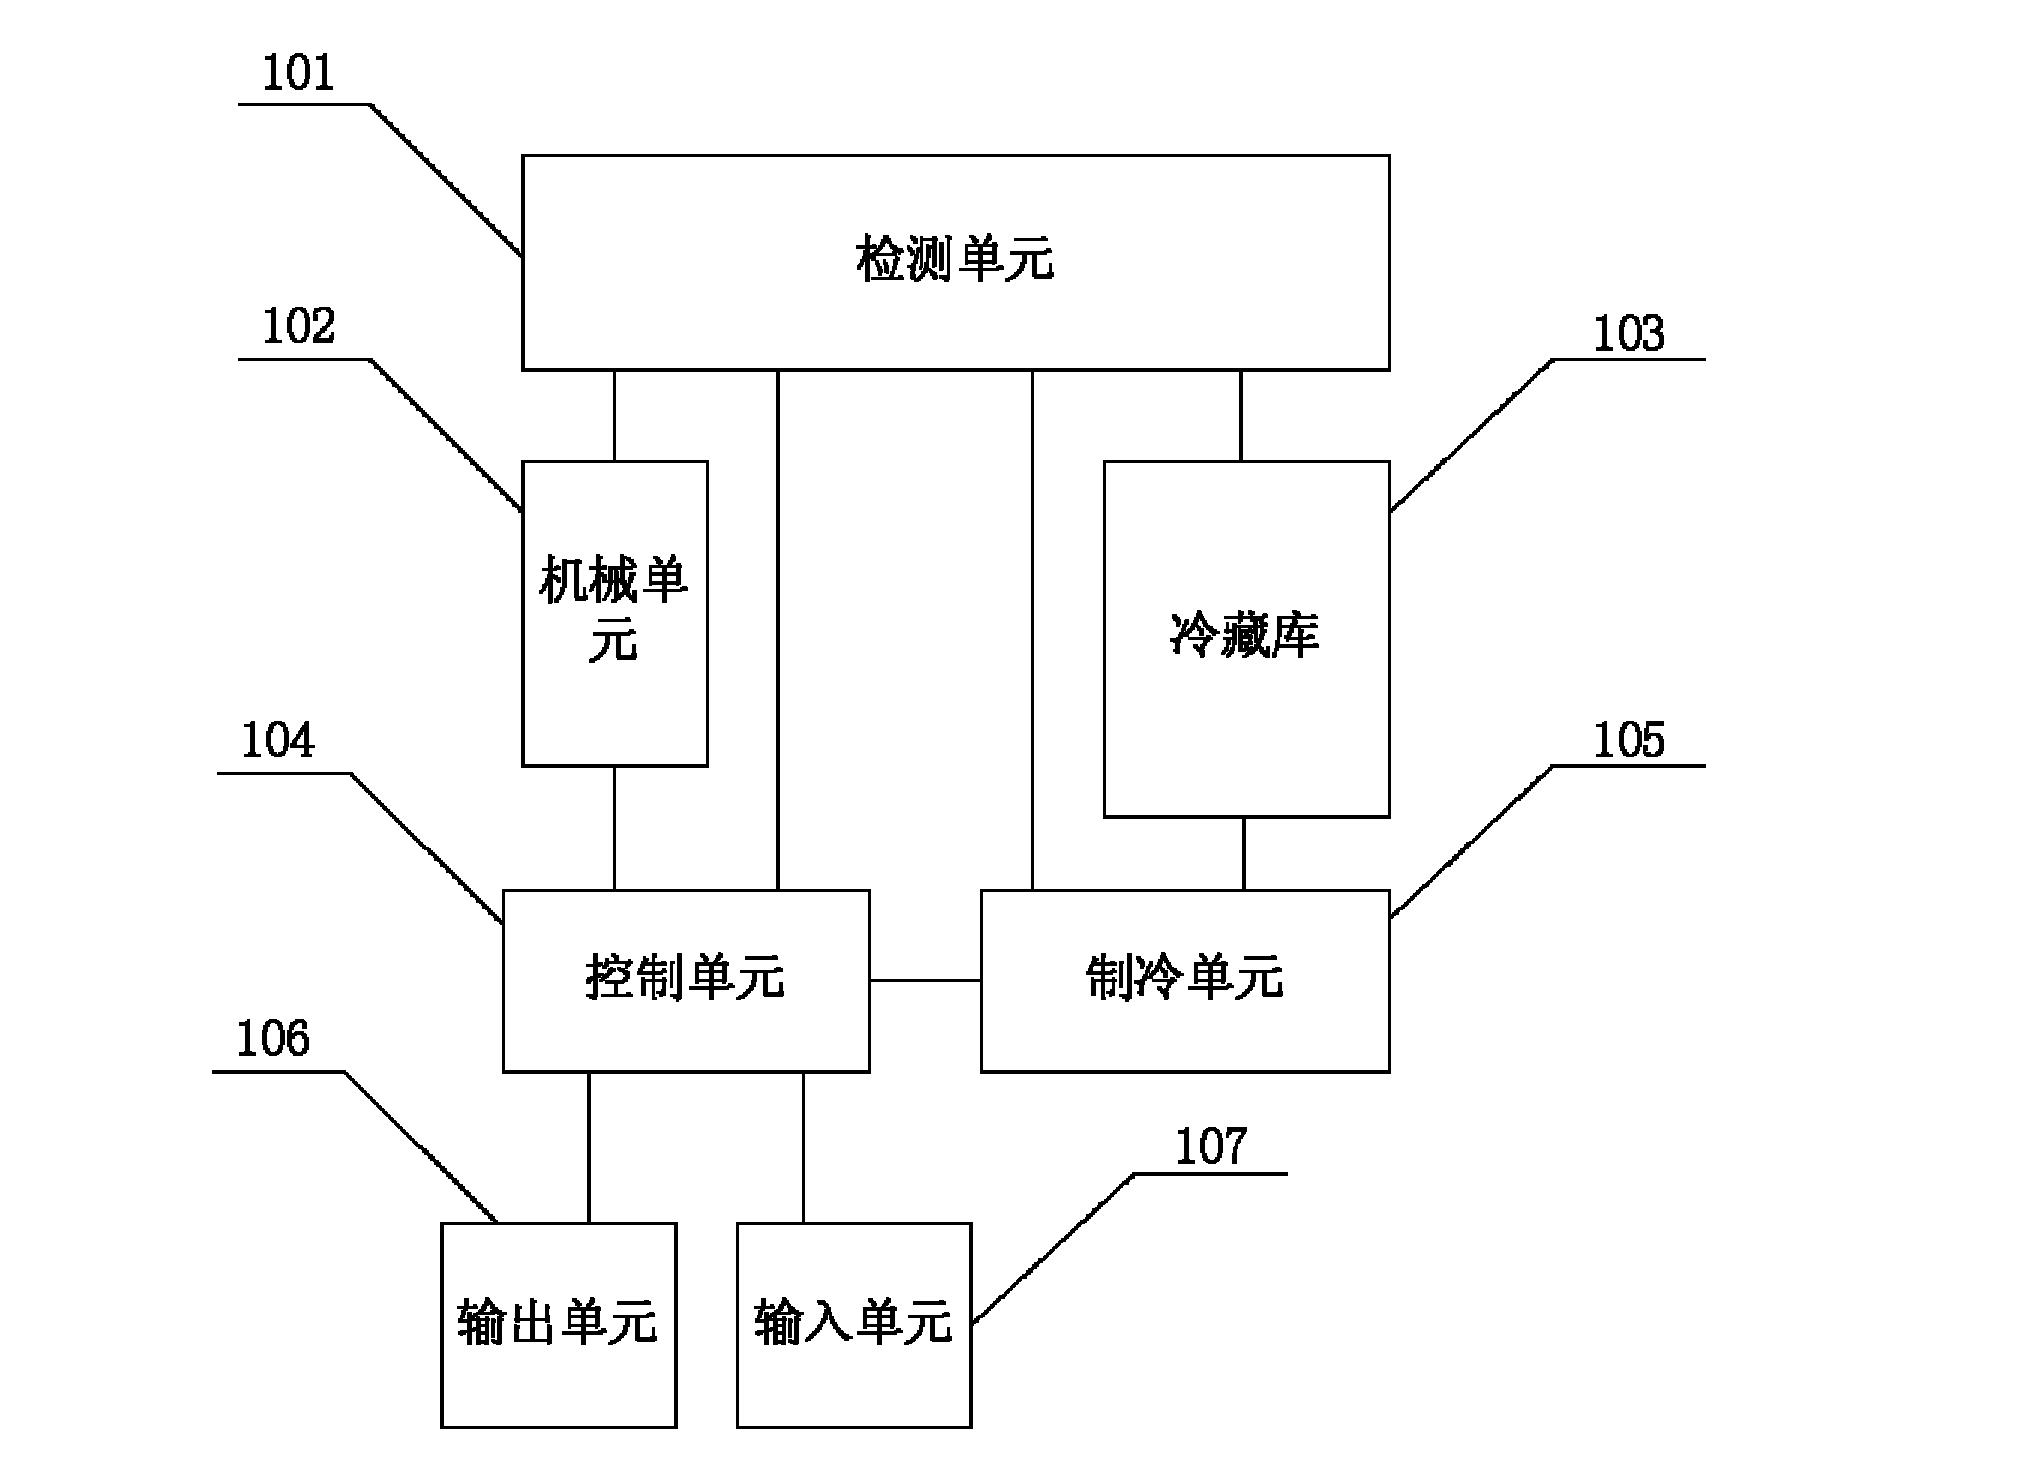 Blood intelligent control storage system and method thereof